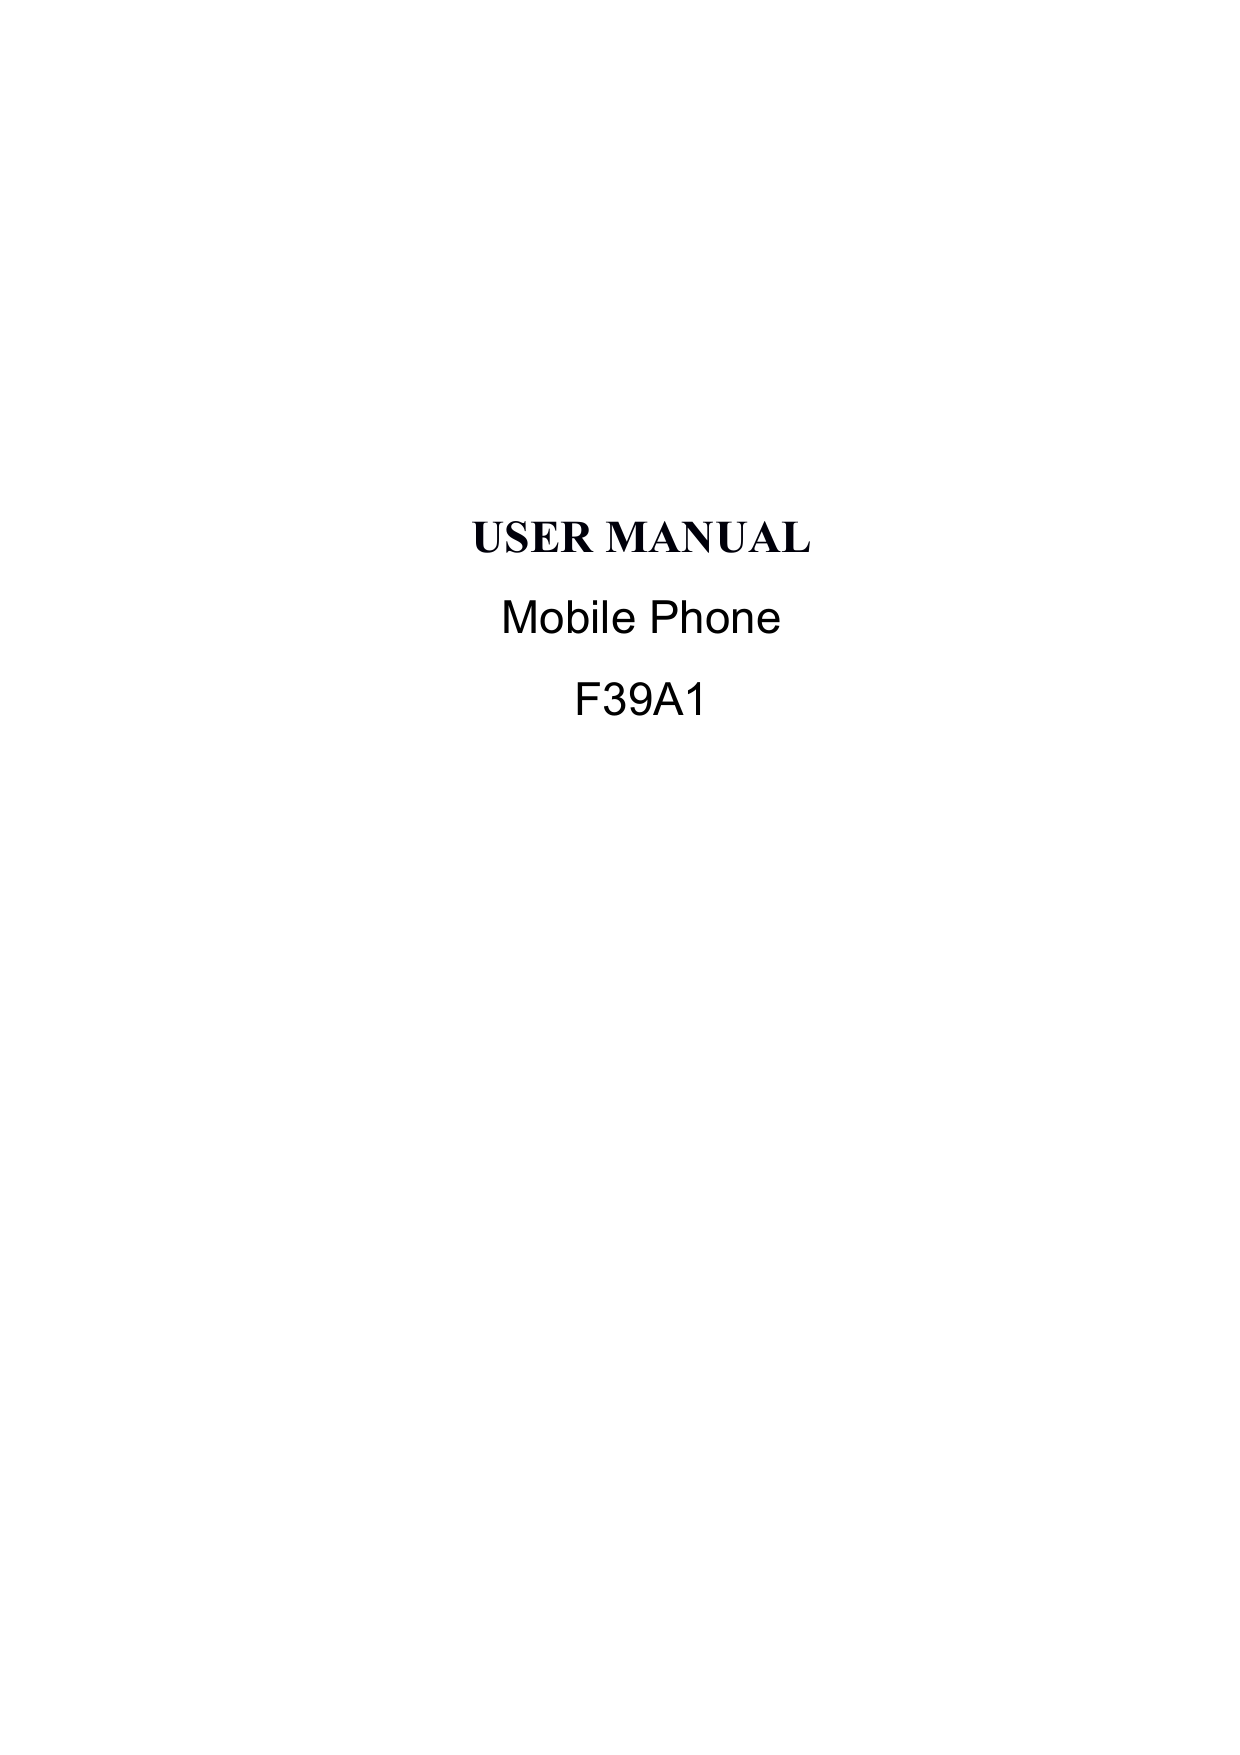         USER MANUAL Mobile Phone F39A1  